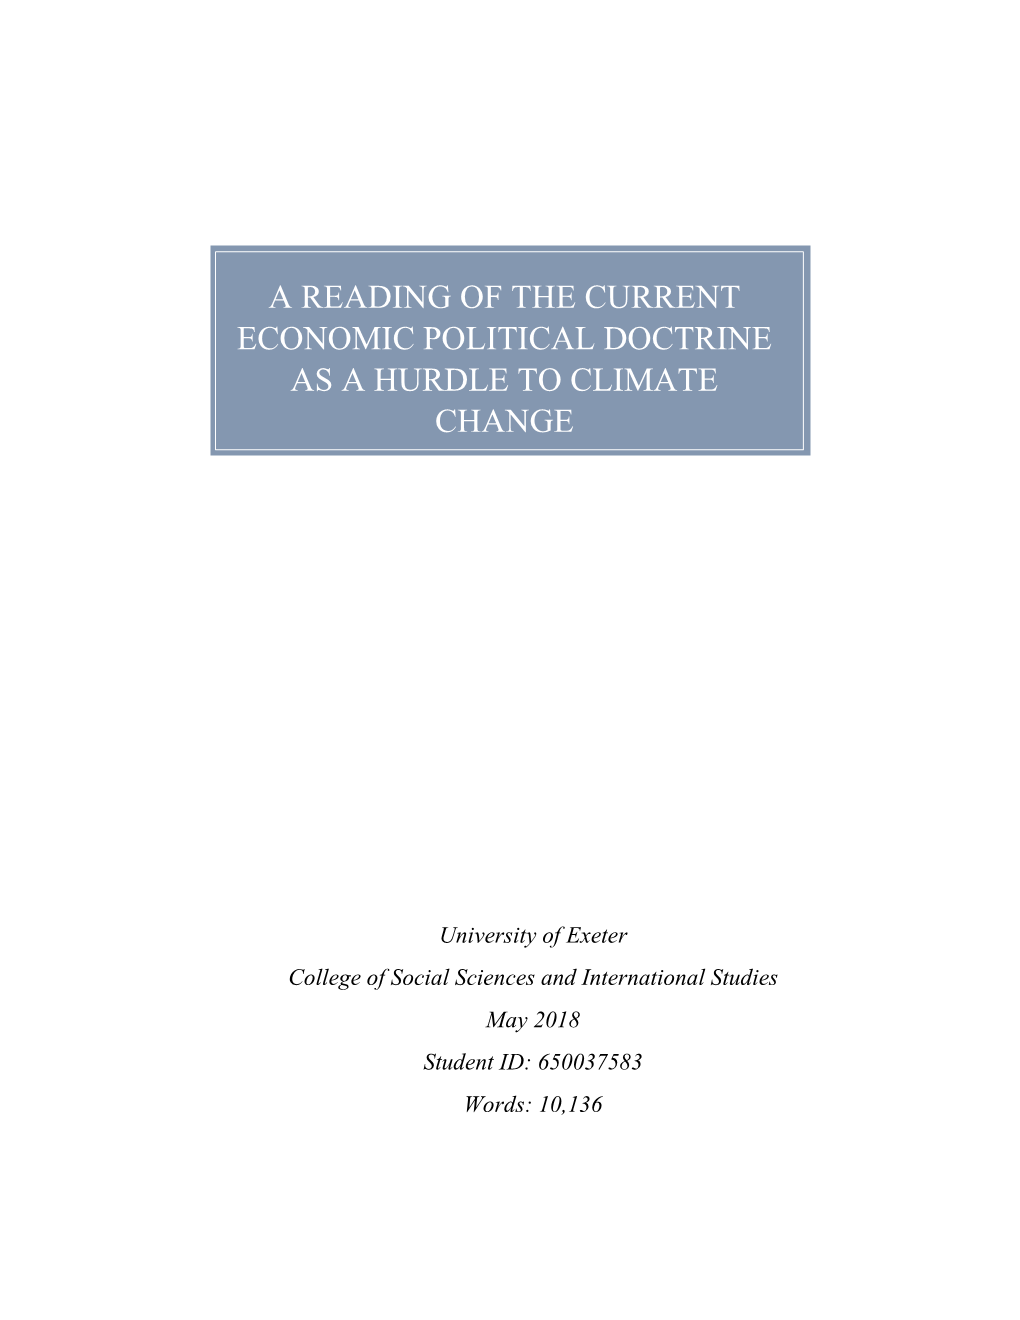 A Reading of the Current Economic Political Doctrine As a Hurdle to Climate Change